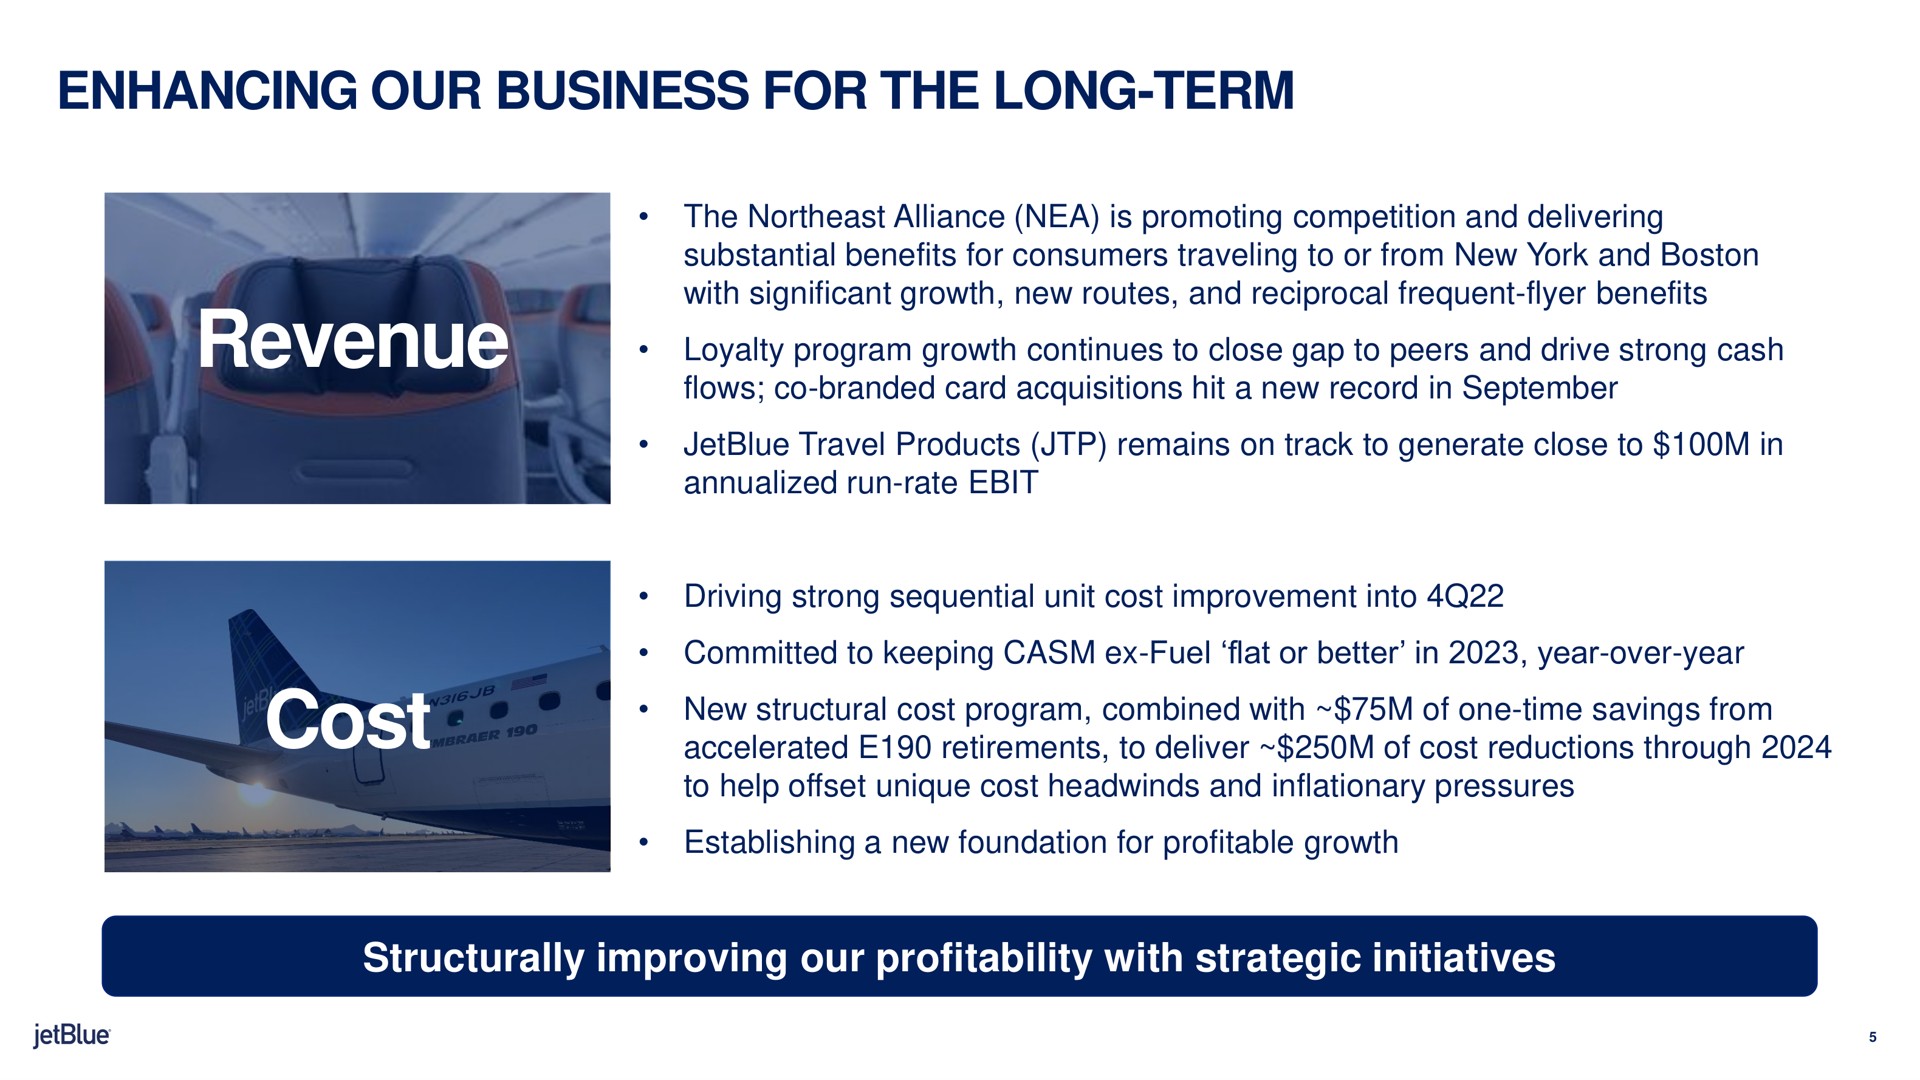 enhancing our business for the long term revenue cost structurally improving our profitability with strategic initiatives committed to keeping fuel flat or better in year over year establishing a new foundation profitable growth | jetBlue